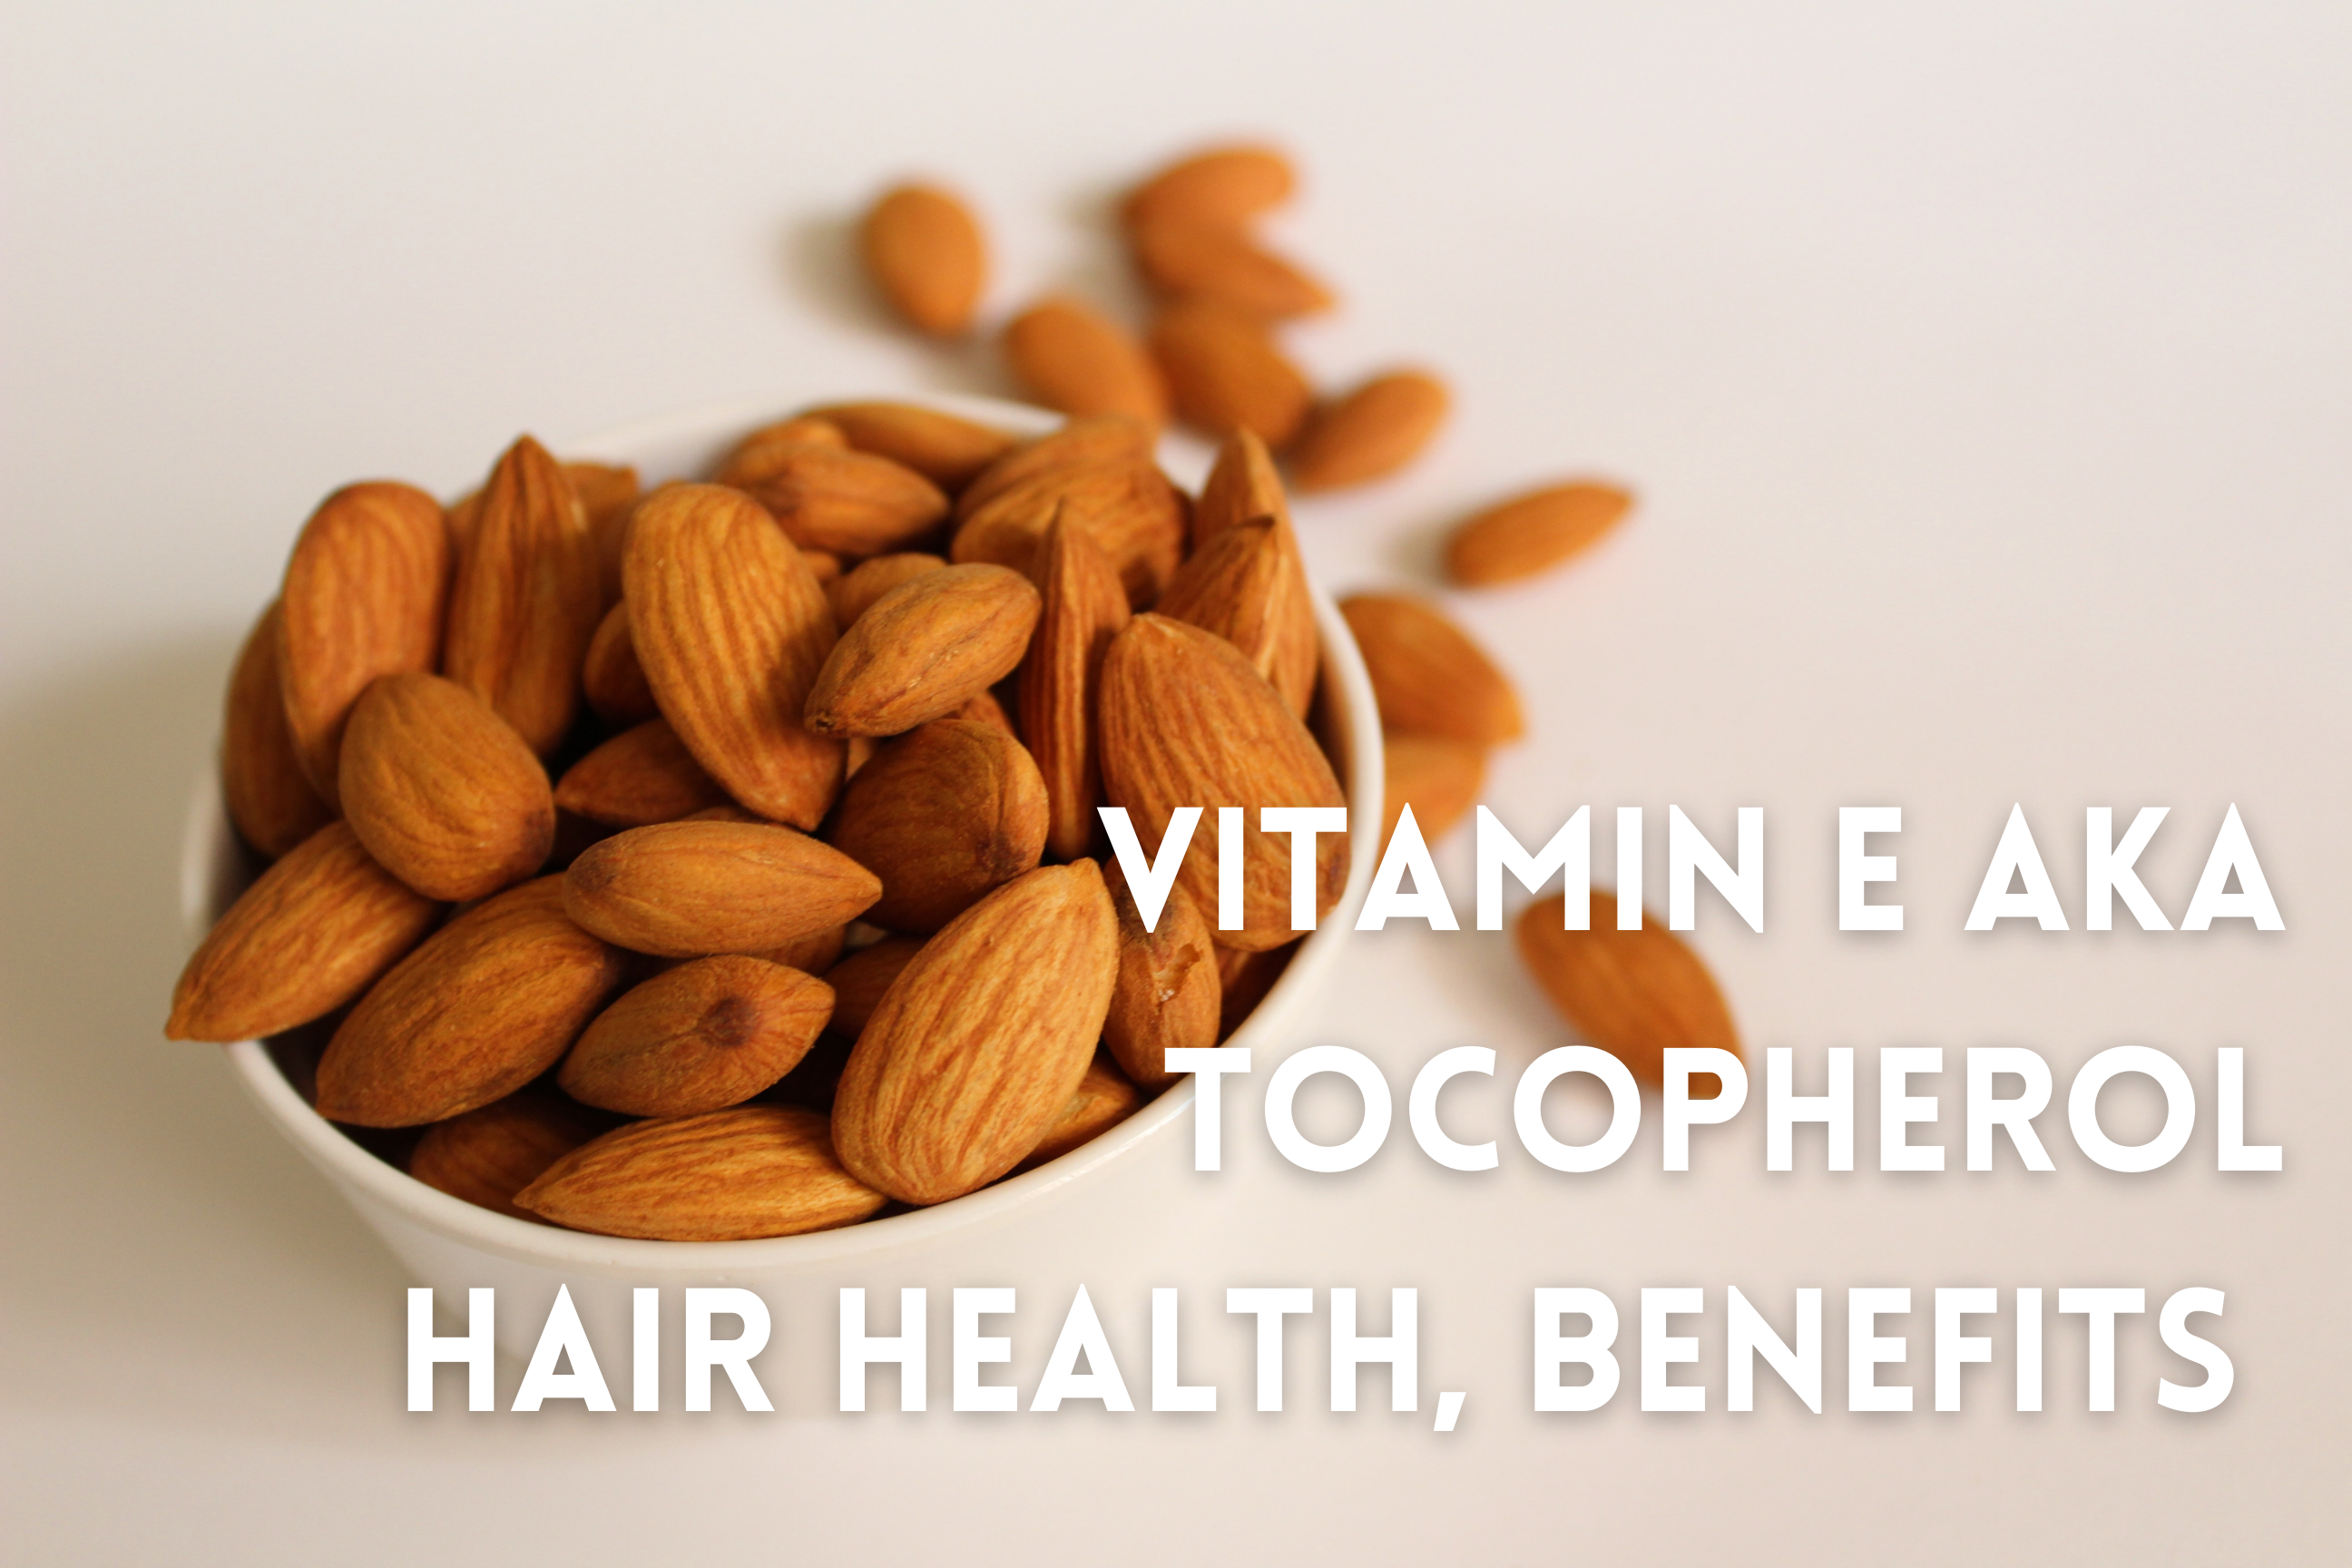 VIDEO: Vitamin E for Hair Growth: Benefits, Research & More